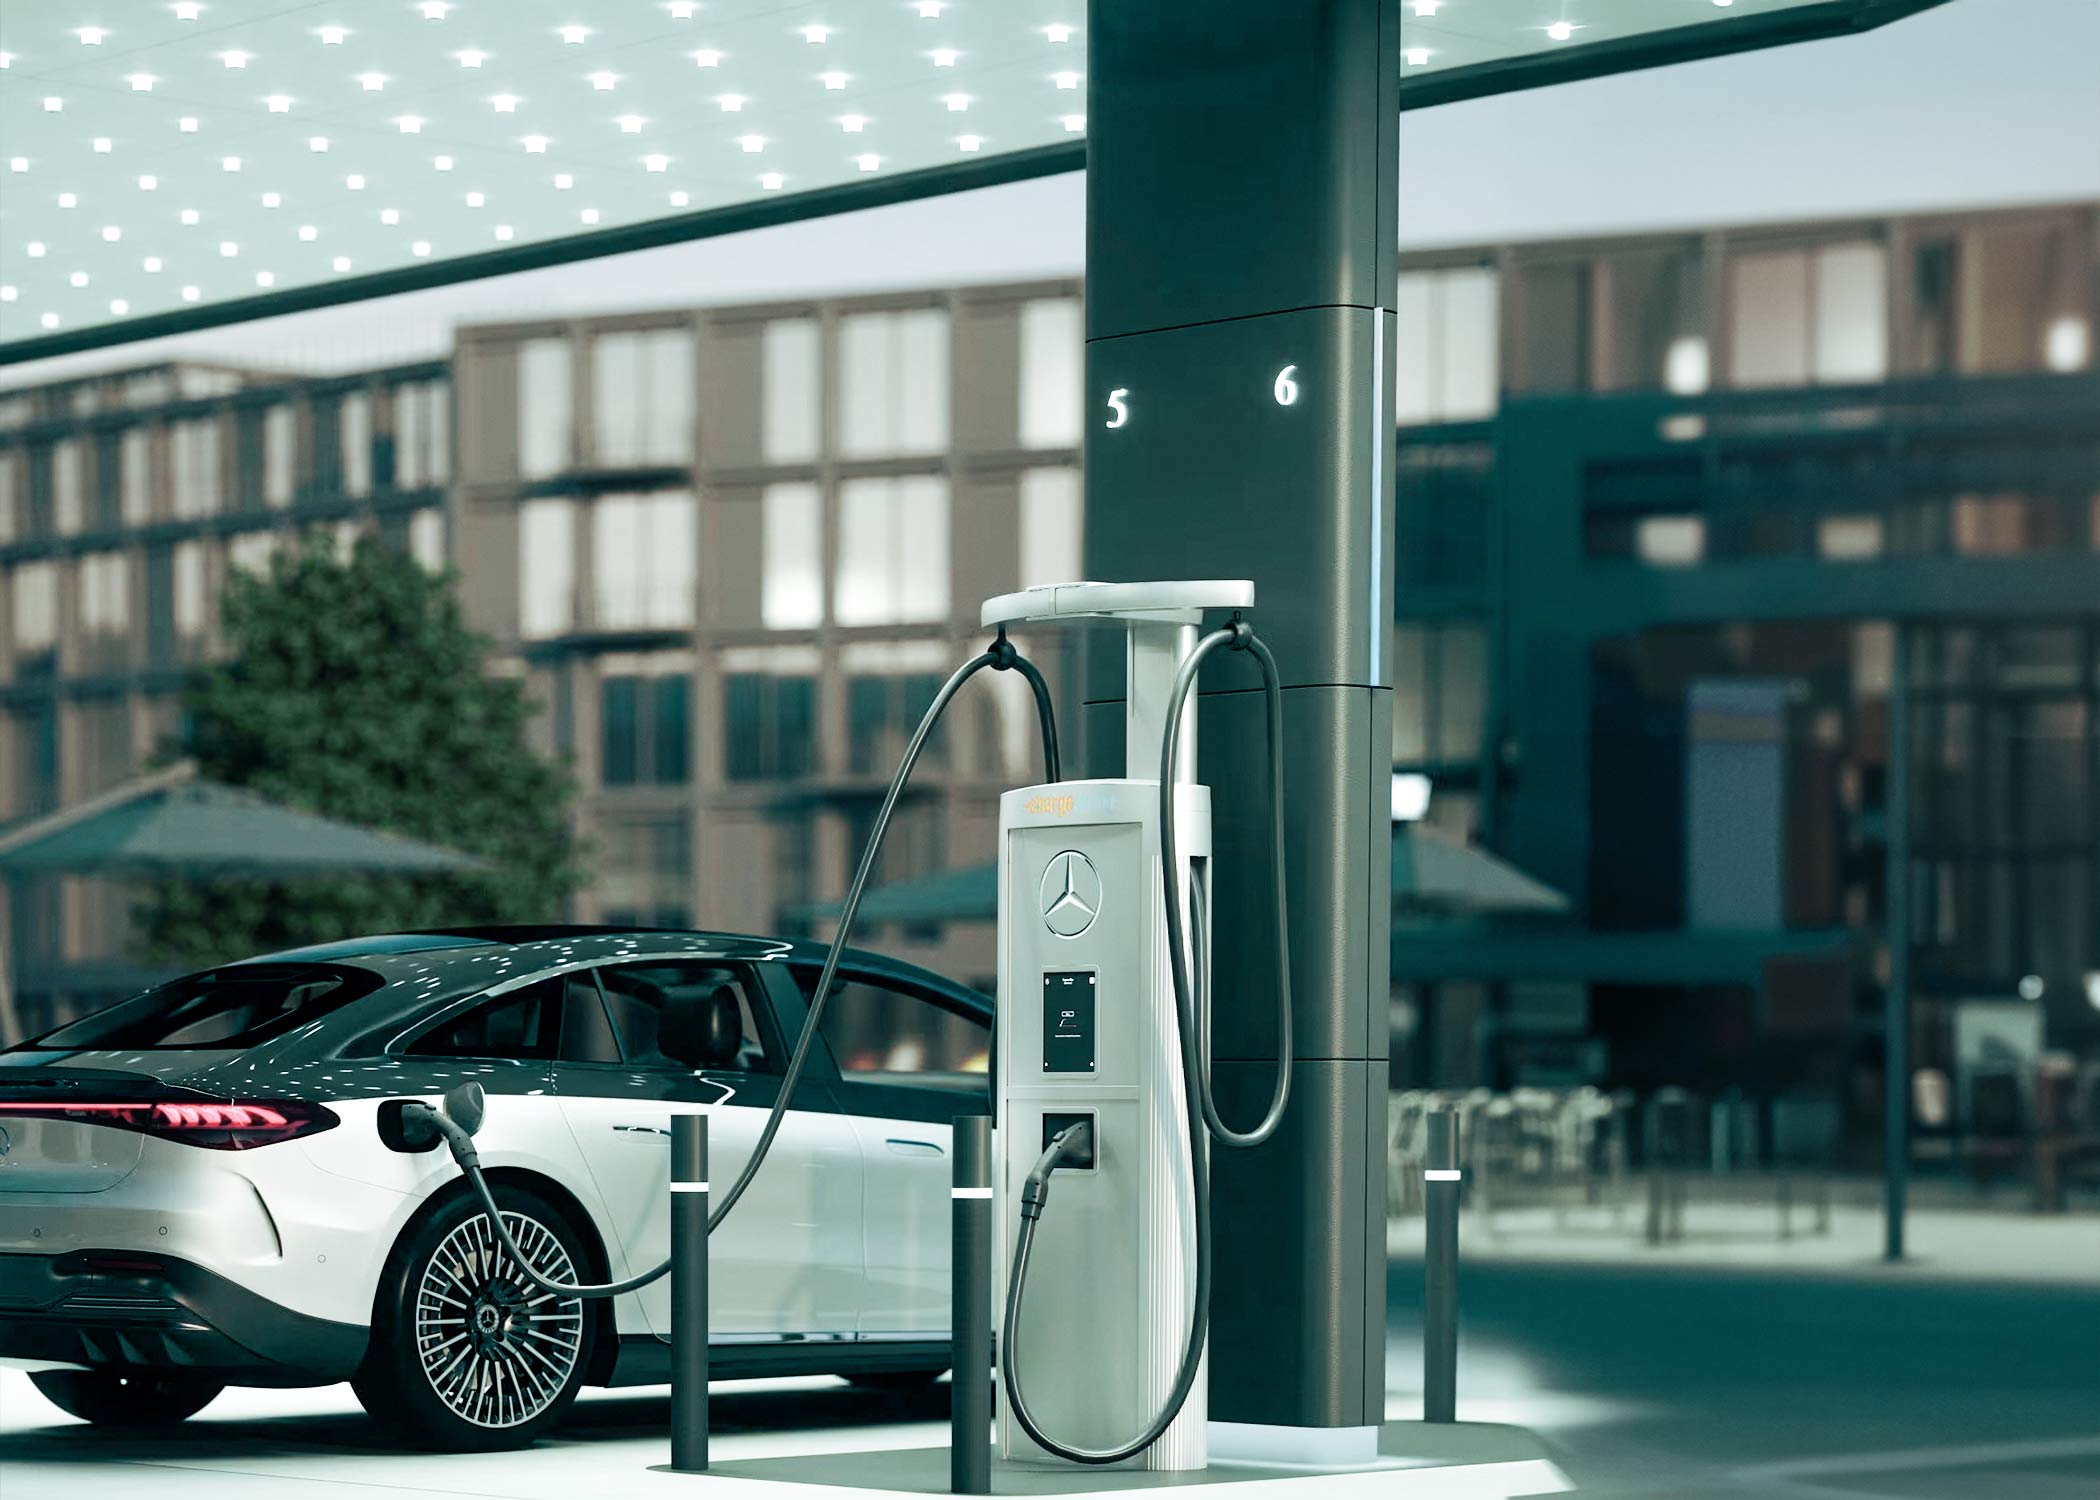 Case e-learning for Mercedes. A Mercedes electric charging station.